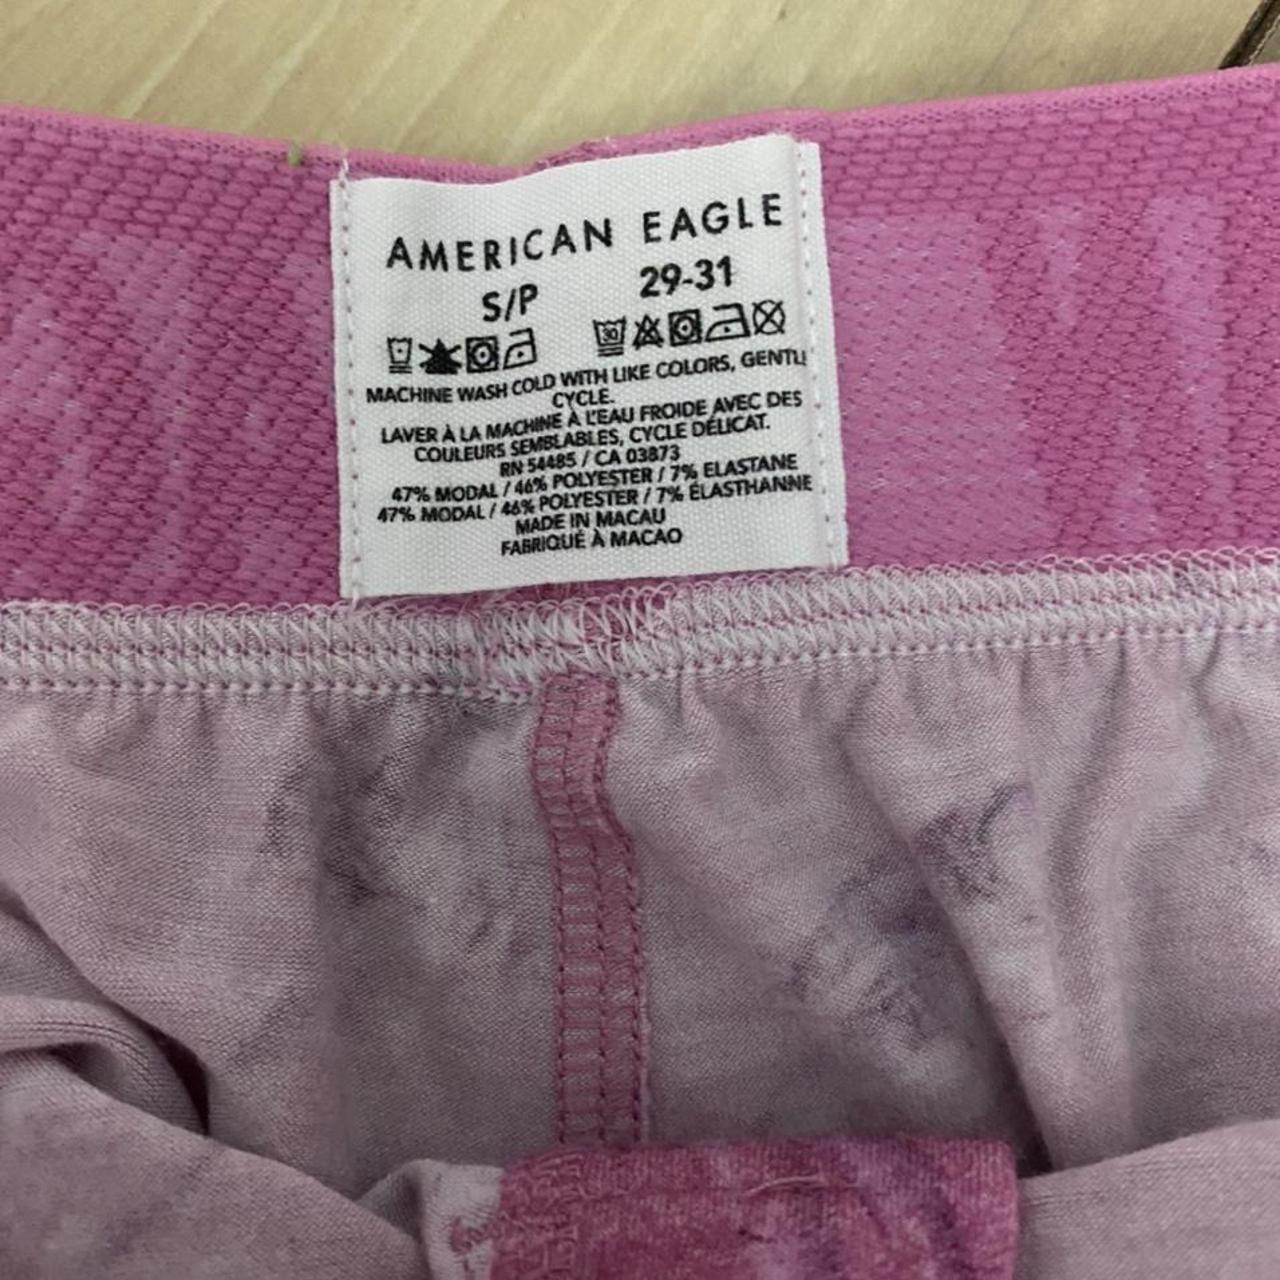 American Eagle Outfitters Men's Pink Boxers-and-briefs | Depop